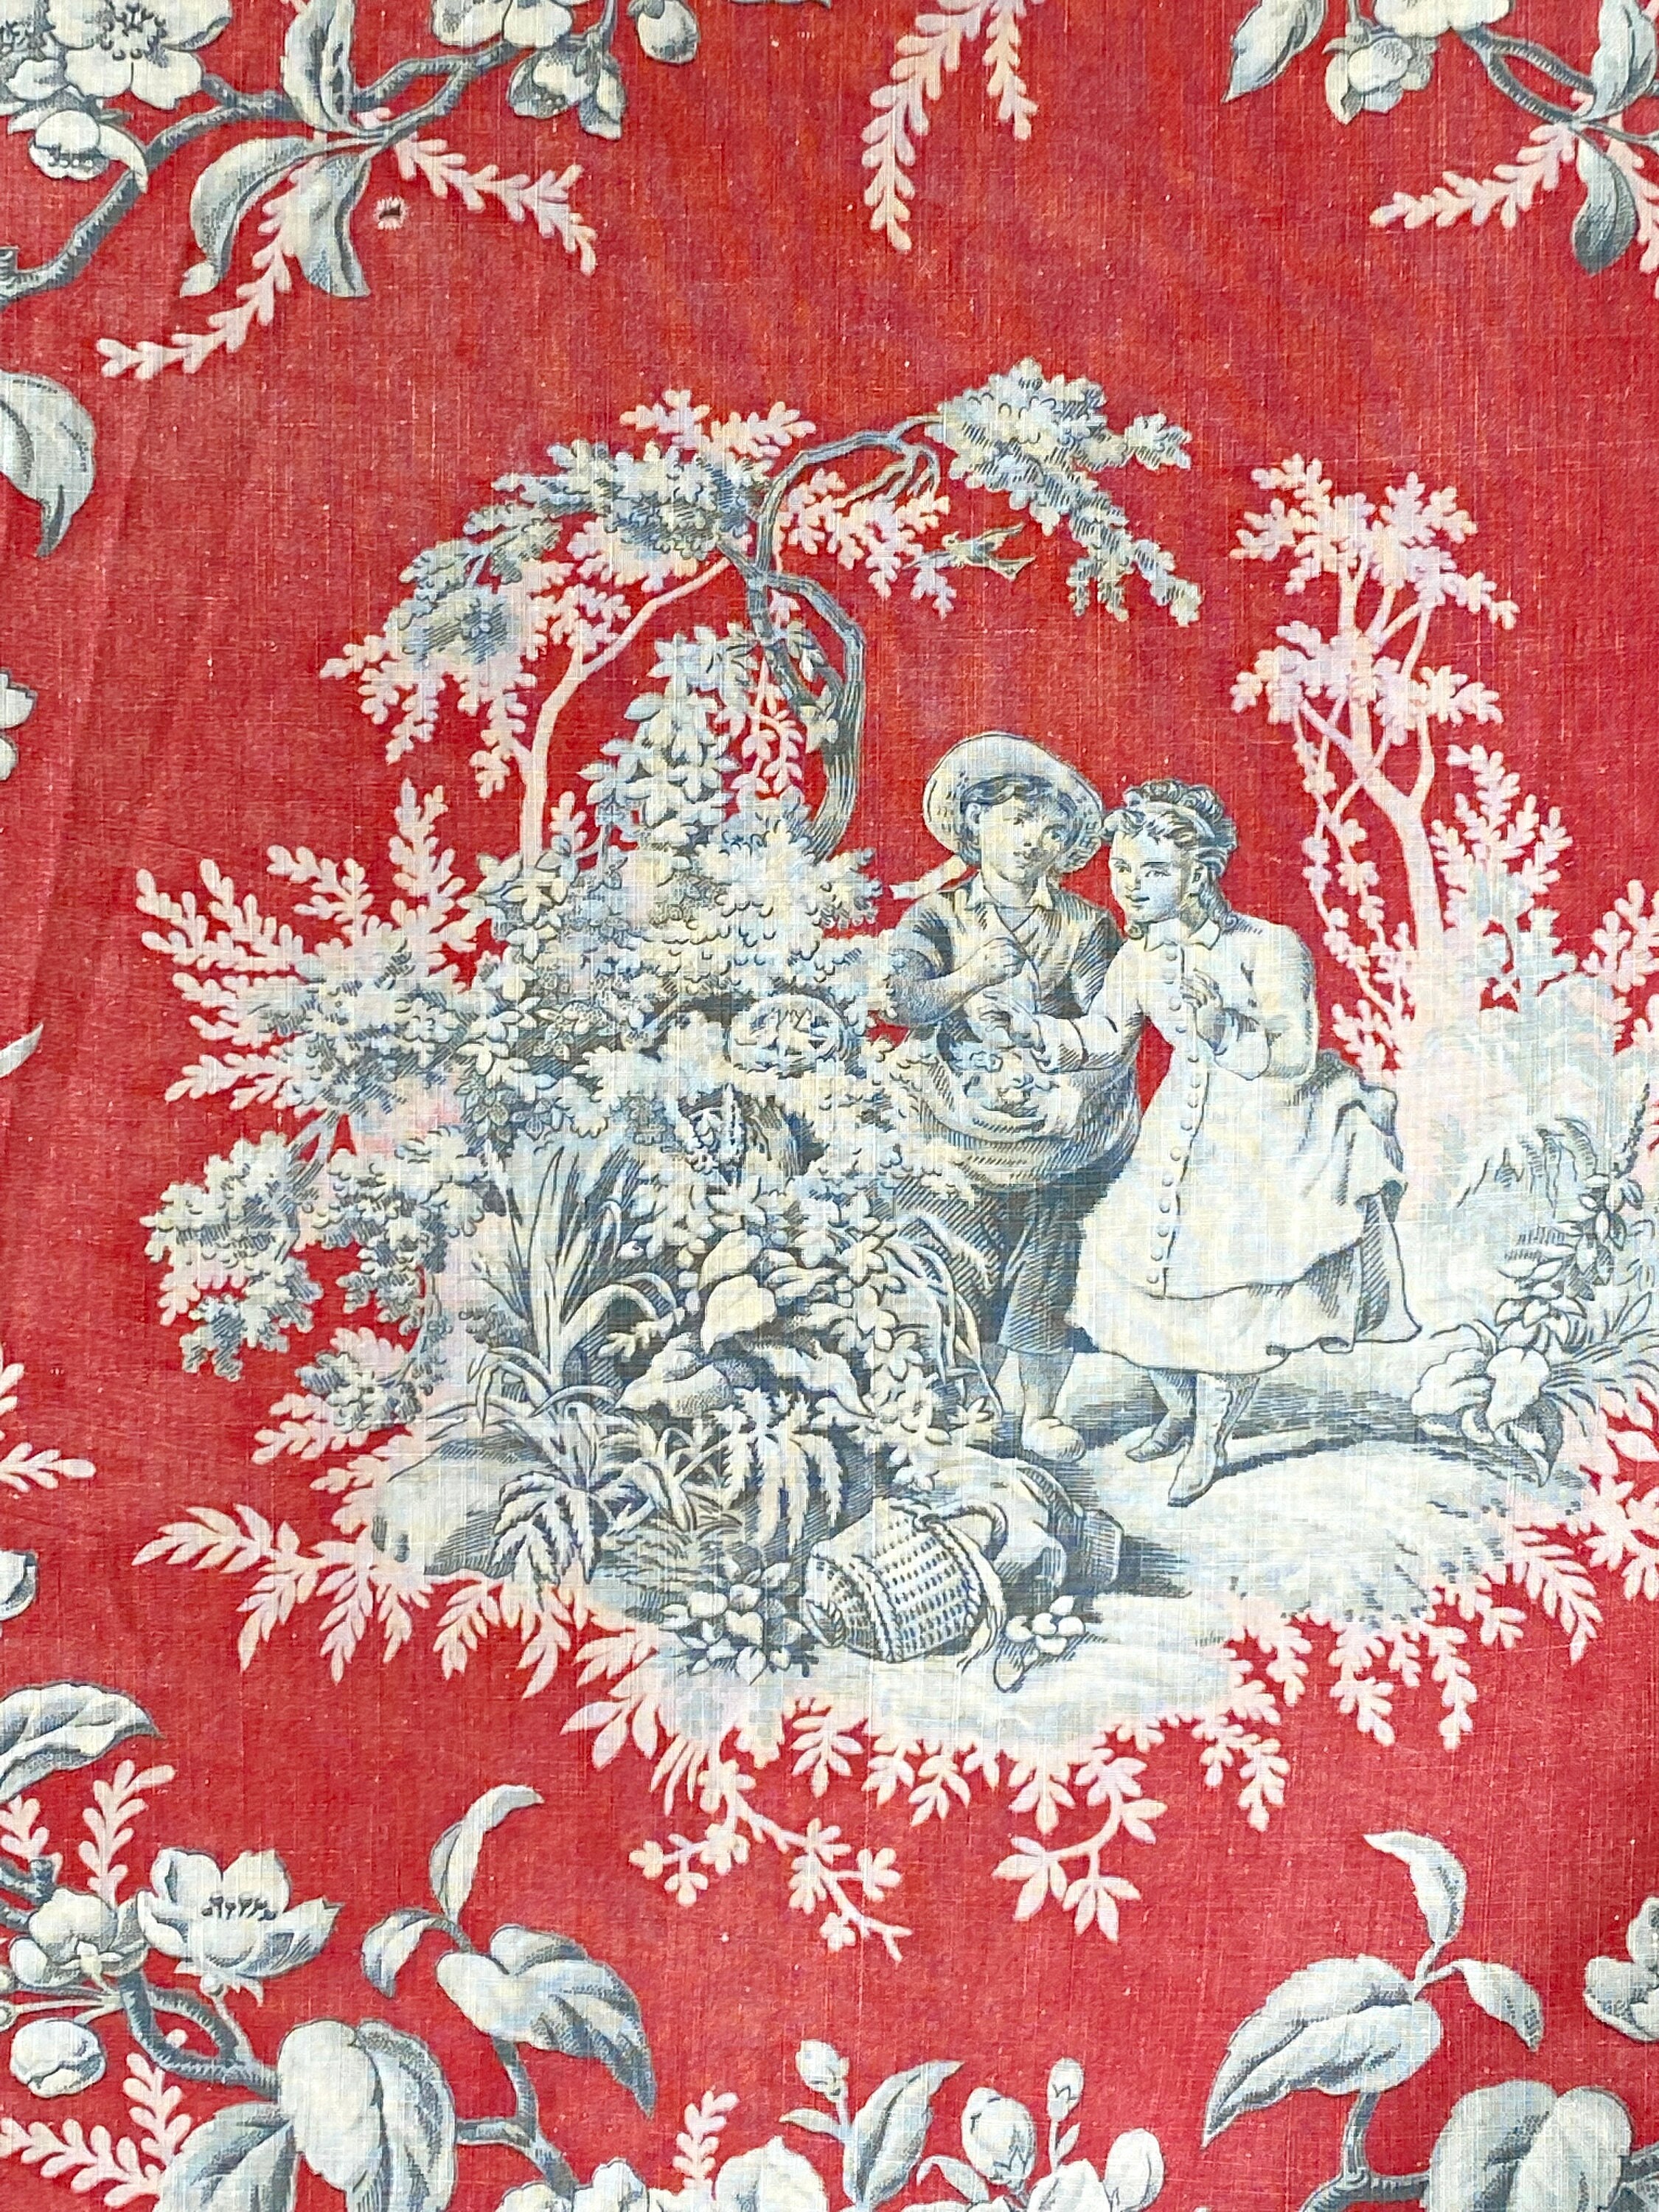 Antique French Toile 1808 Cupids and Medallions Toile De Jouy 